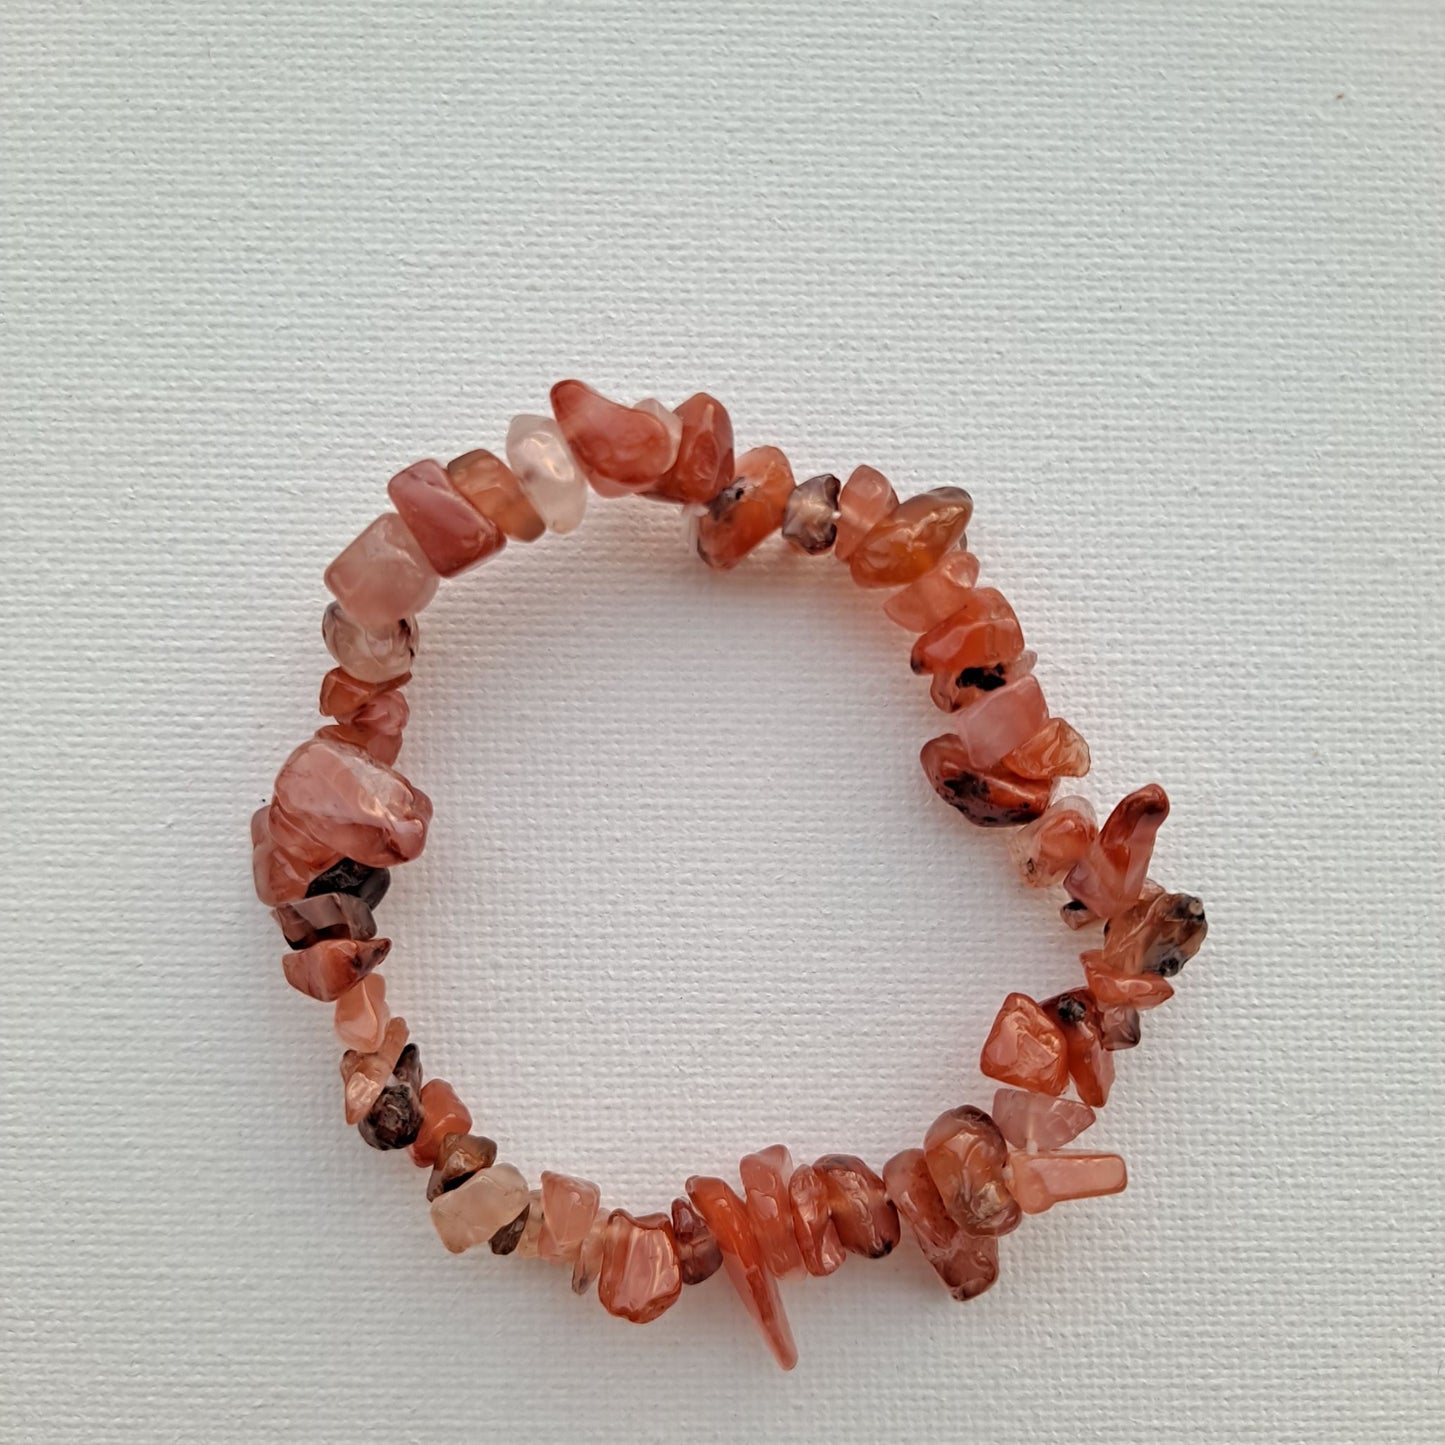 Dumi's Crystals Carnelian Chip Bracelet. Embrace your inner fire! Genuine Carnelian chips in vibrant hues. Boosts motivation, joy & self-expression.